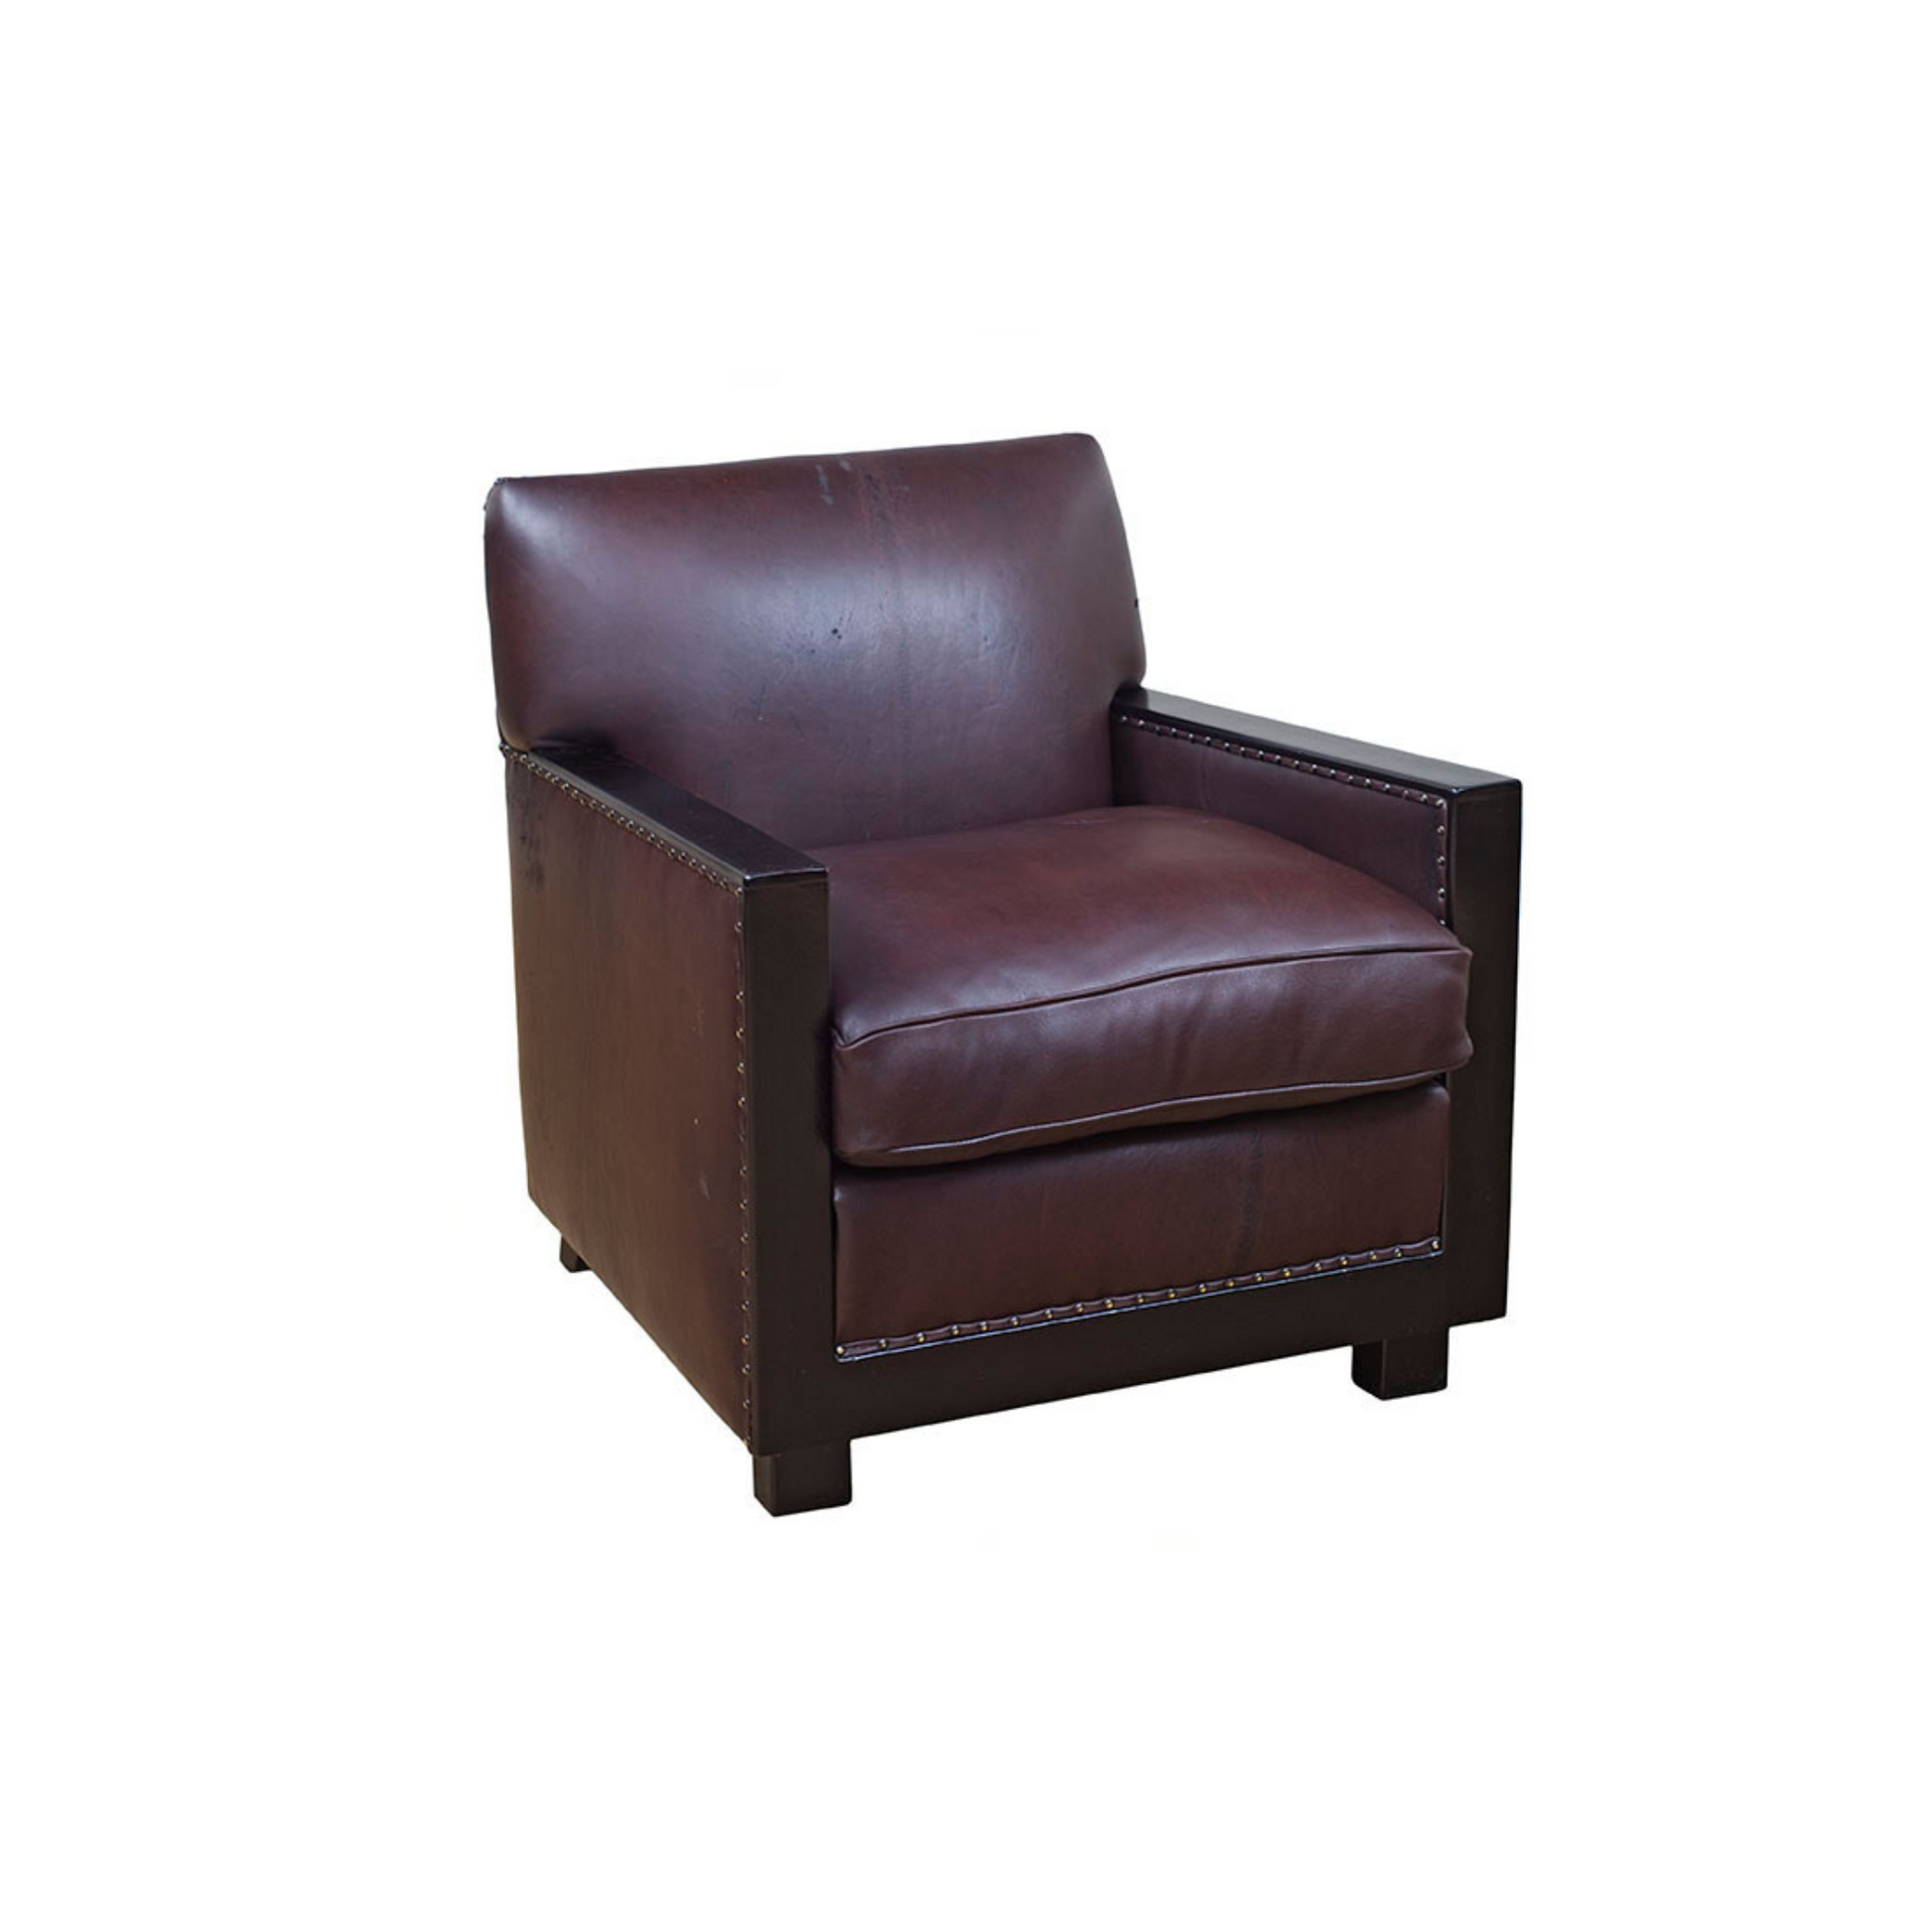 Zimbali Armchair – Embrace the essence of the lodge with the Zimbali Armchair. Crafted in Kudu Oxblood leather and African Mahogany timber, this occasional chair can be customized with your choice of leather, and Nguni, Zebra, or your preferred hair-on hide skins on selected panels.  Personalize further with your choice of timber or leather arms, ensuring a unique and tailored addition to your space.